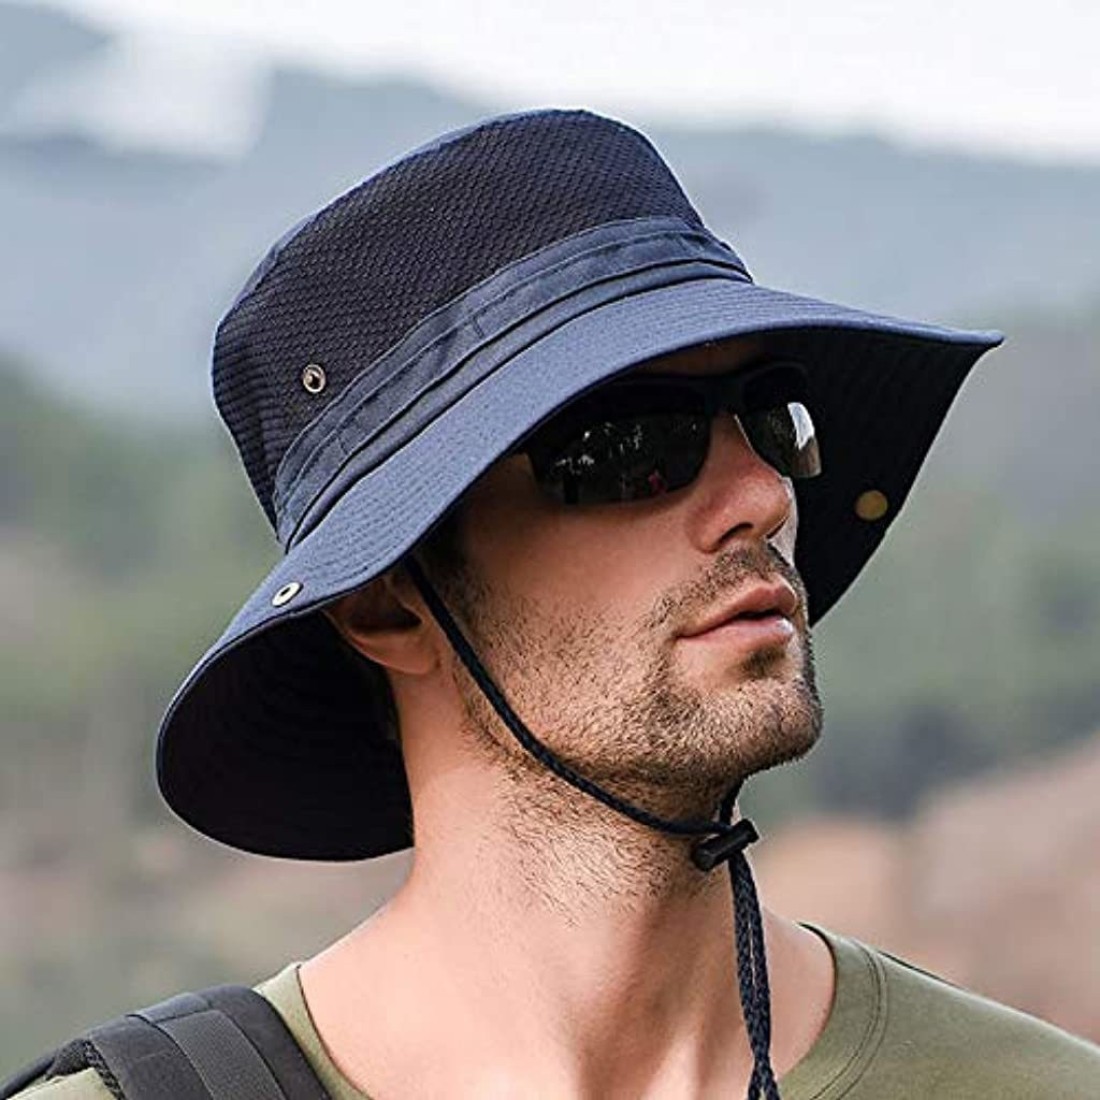 gustave Sun Cap UV Protection Fishsing Hat Price in India - Buy gustave Sun  Cap UV Protection Fishsing Hat online at